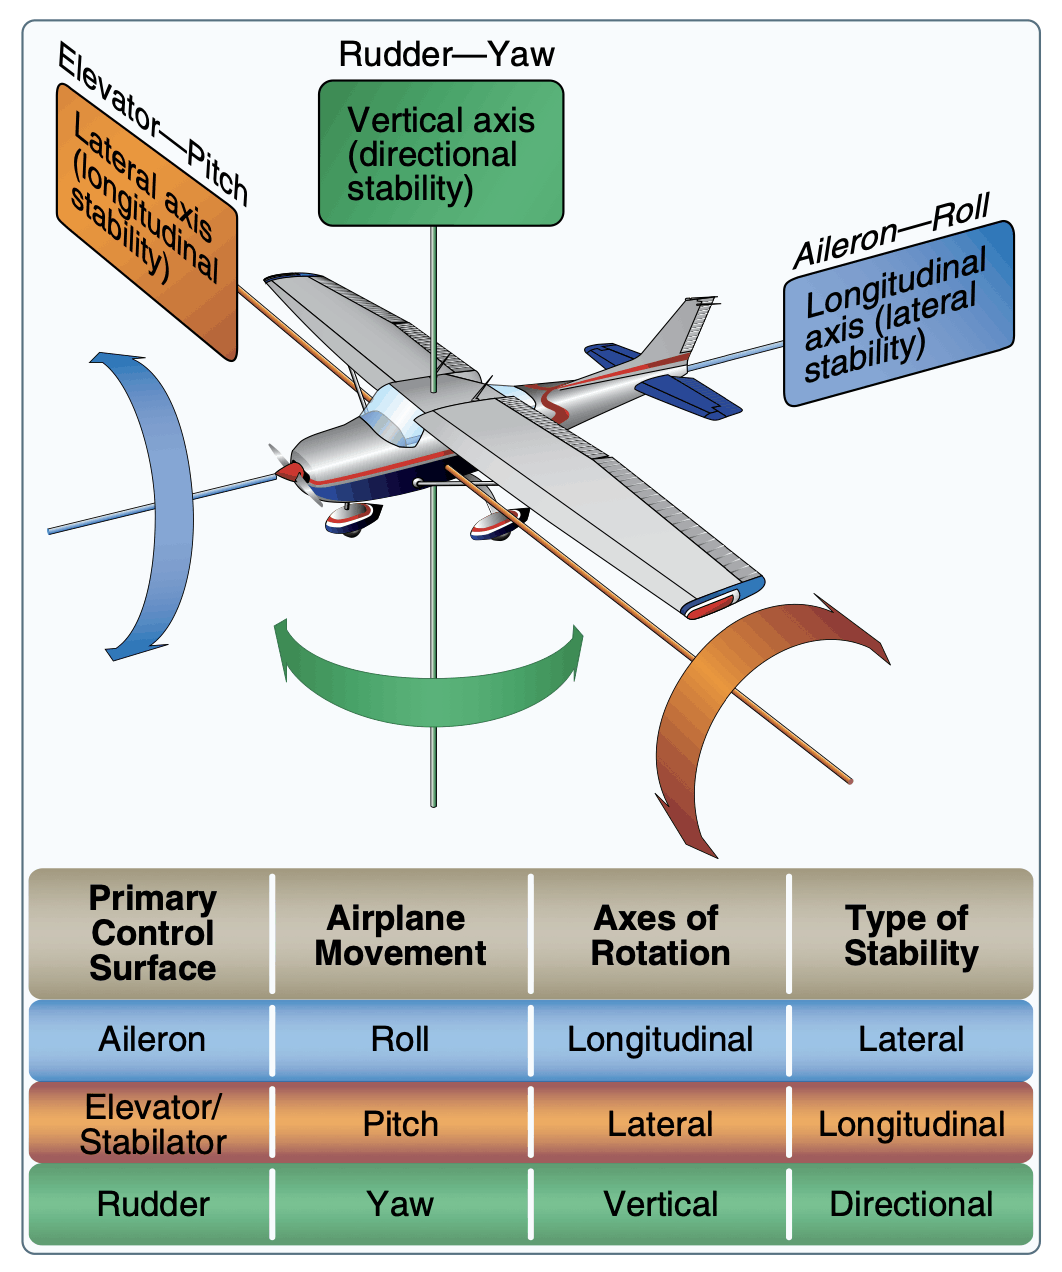 what is the differential aileron travel